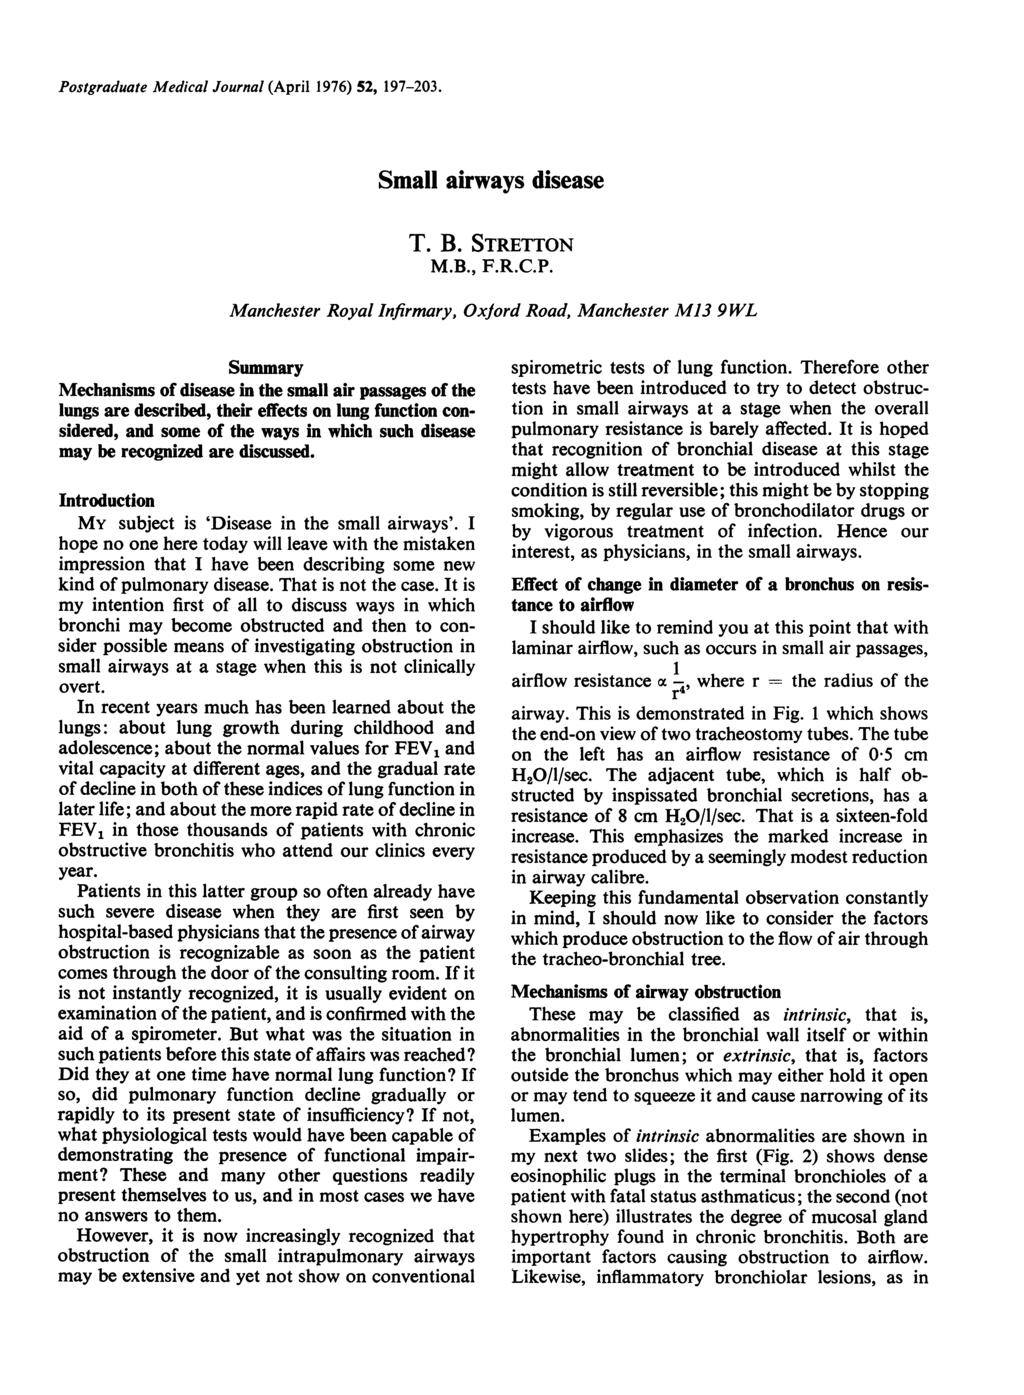 Postgraduate Medical Journal (April 1976) 52, 197-23. Small airways disease T. B. STRETTON M.B., F.R.C.P. Manchester Royal Infirmary, Oxford Road, Manchester M13 9 WL Summary Mechanisms of disease in